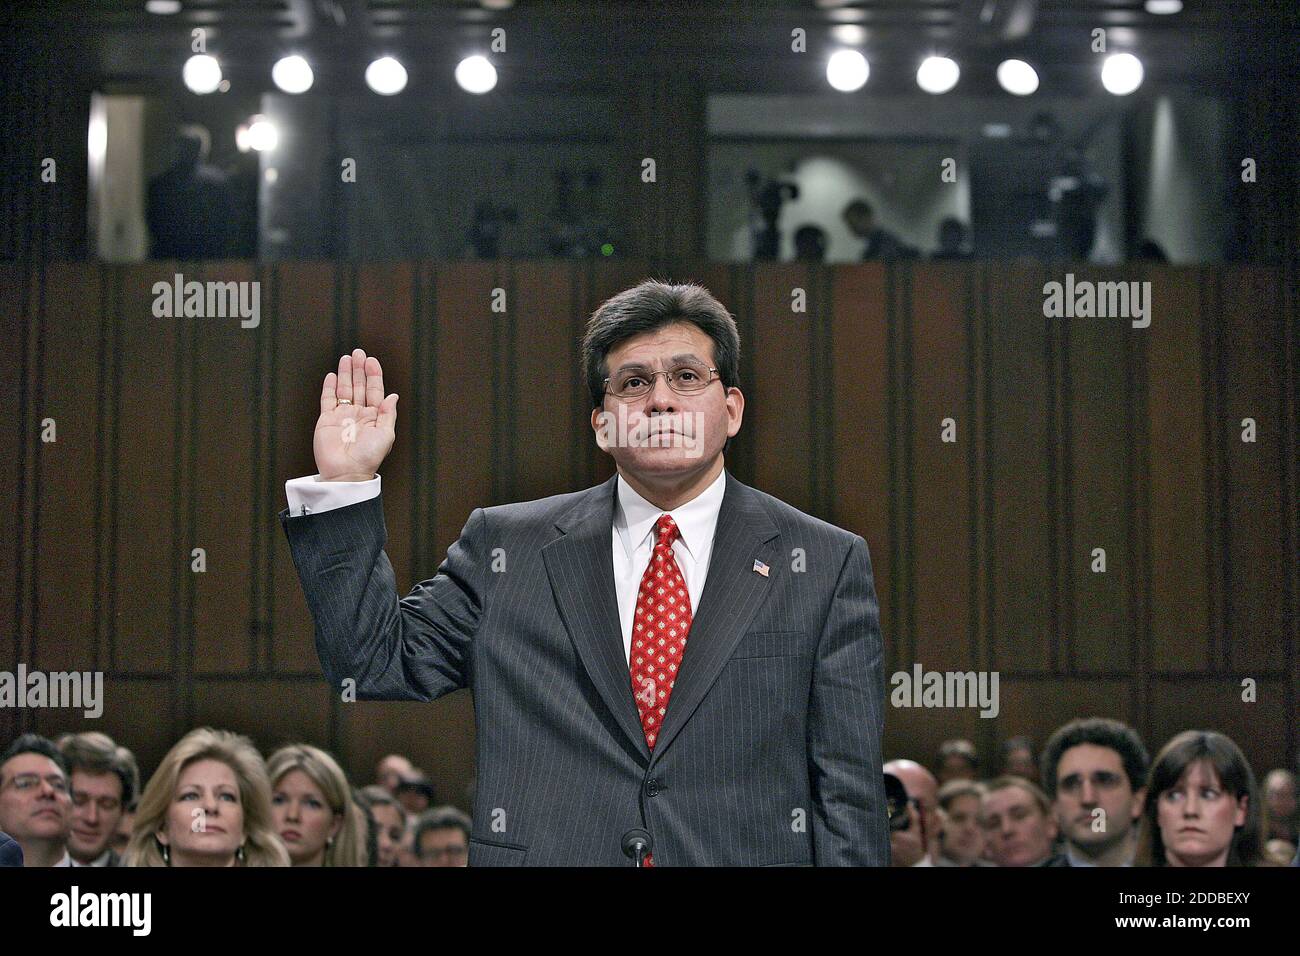 NO FILM, NO VIDEO, NO TV, NO DOCUMENTARY - Attorney General nominee Alberto Gonzales is sworn-in before the Senate Judiciary Committee to testify on his confirmation. January, 6, 2005 on Capitol Hill in Washington, DC. White House counsel Gonzales, in line to become the first Hispanic attorney general, had a hand in much of the White House's post-Sept. 11 terrorism policies as President Bush's top lawyer. (Pictured: Alberto Gonzales) Photo by Chuck Kennedy/KRT/ABACA Stock Photo